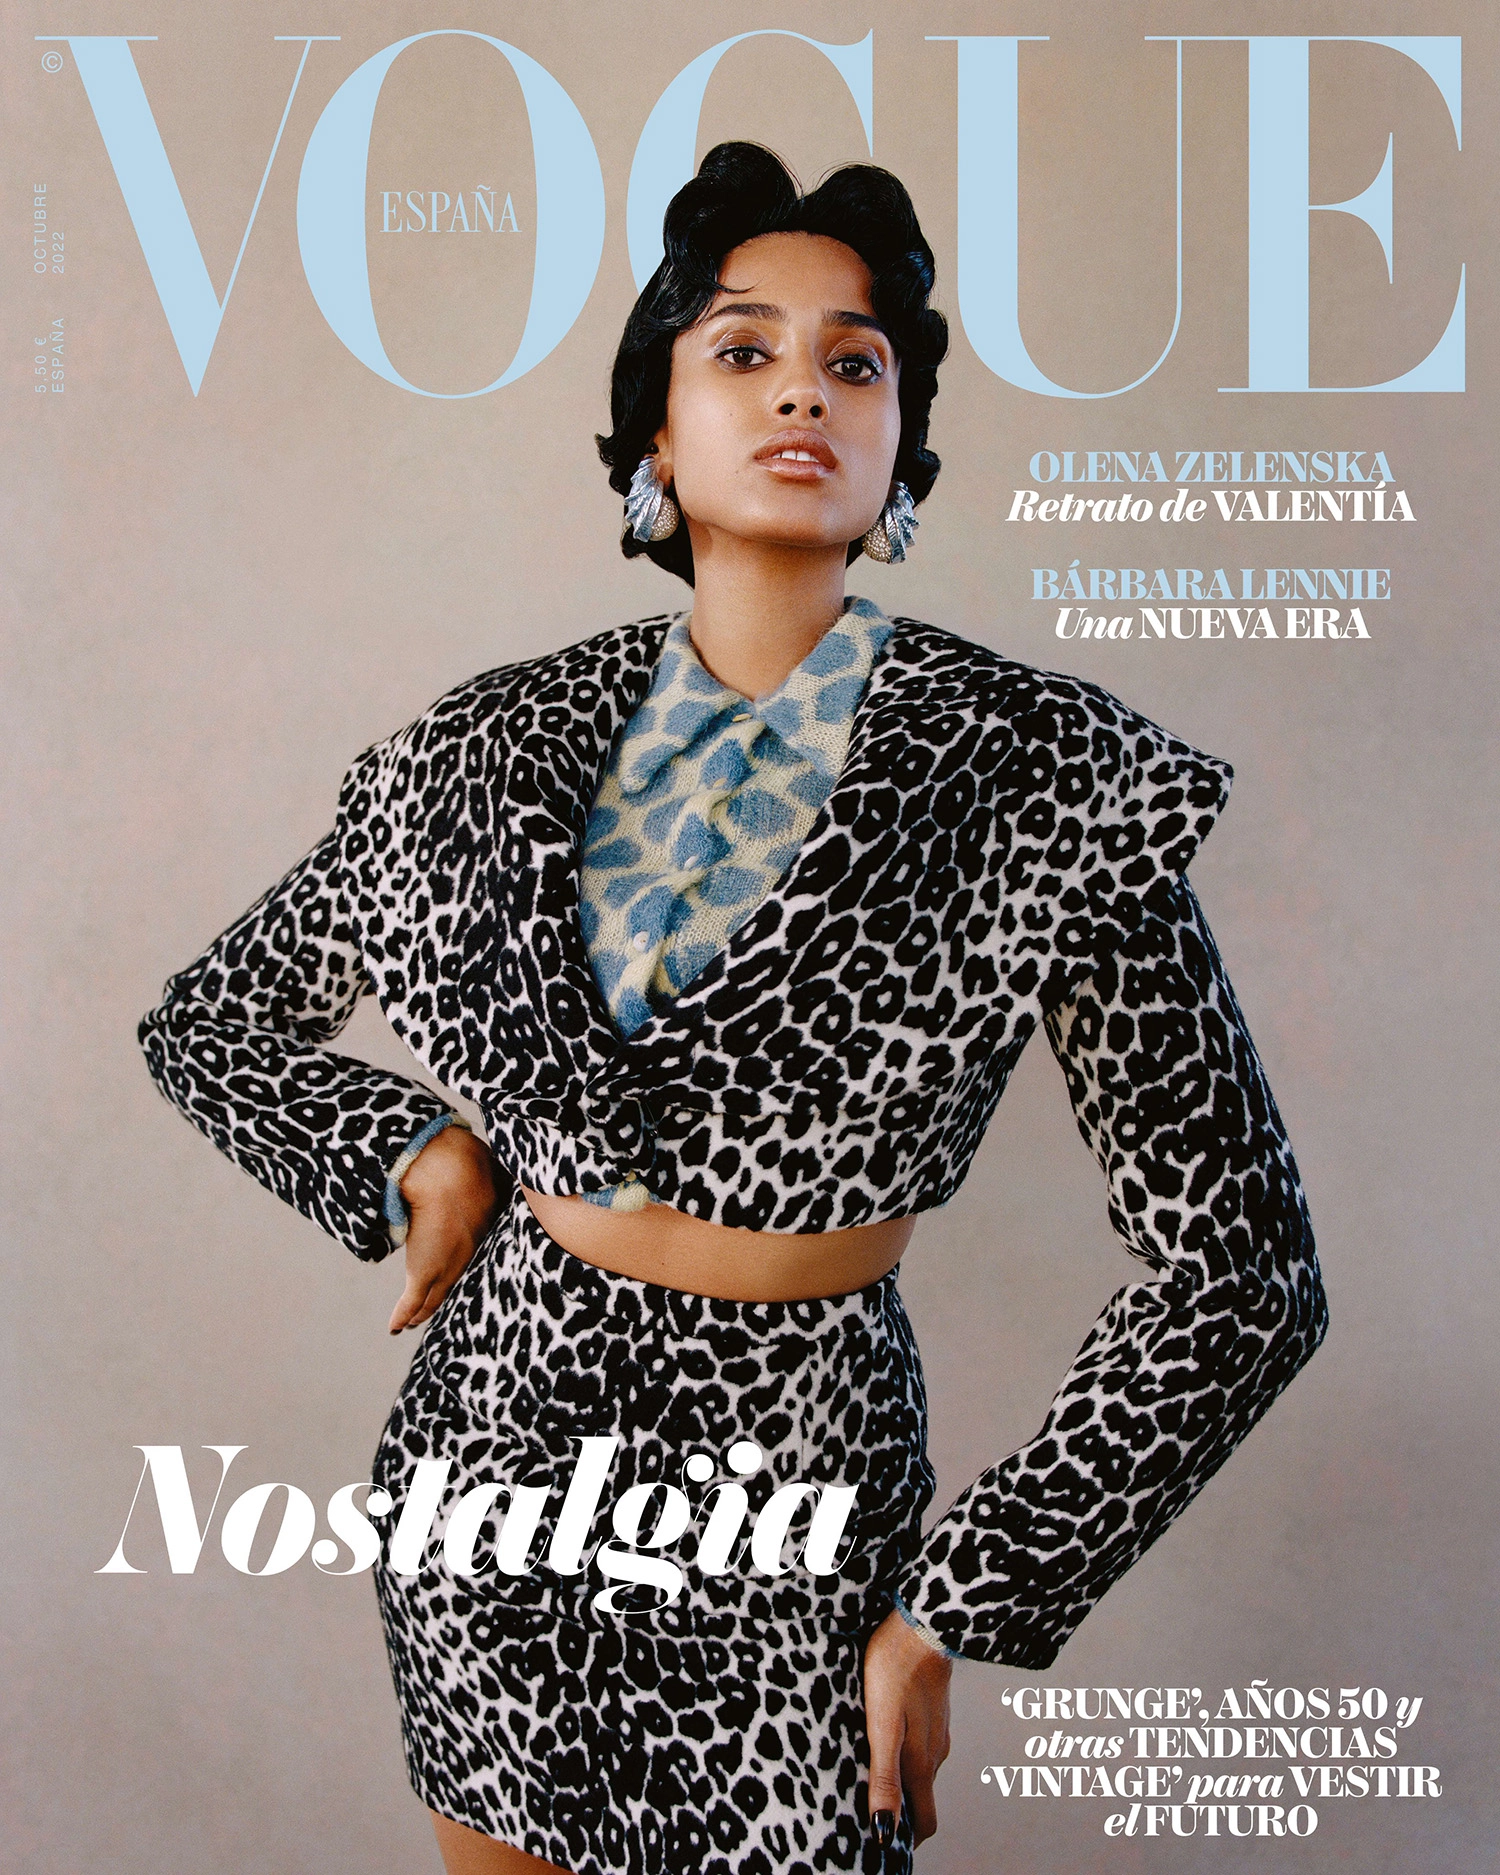 Imaan Hammam covers Vogue Spain October 2022 by Nadine Ijewere